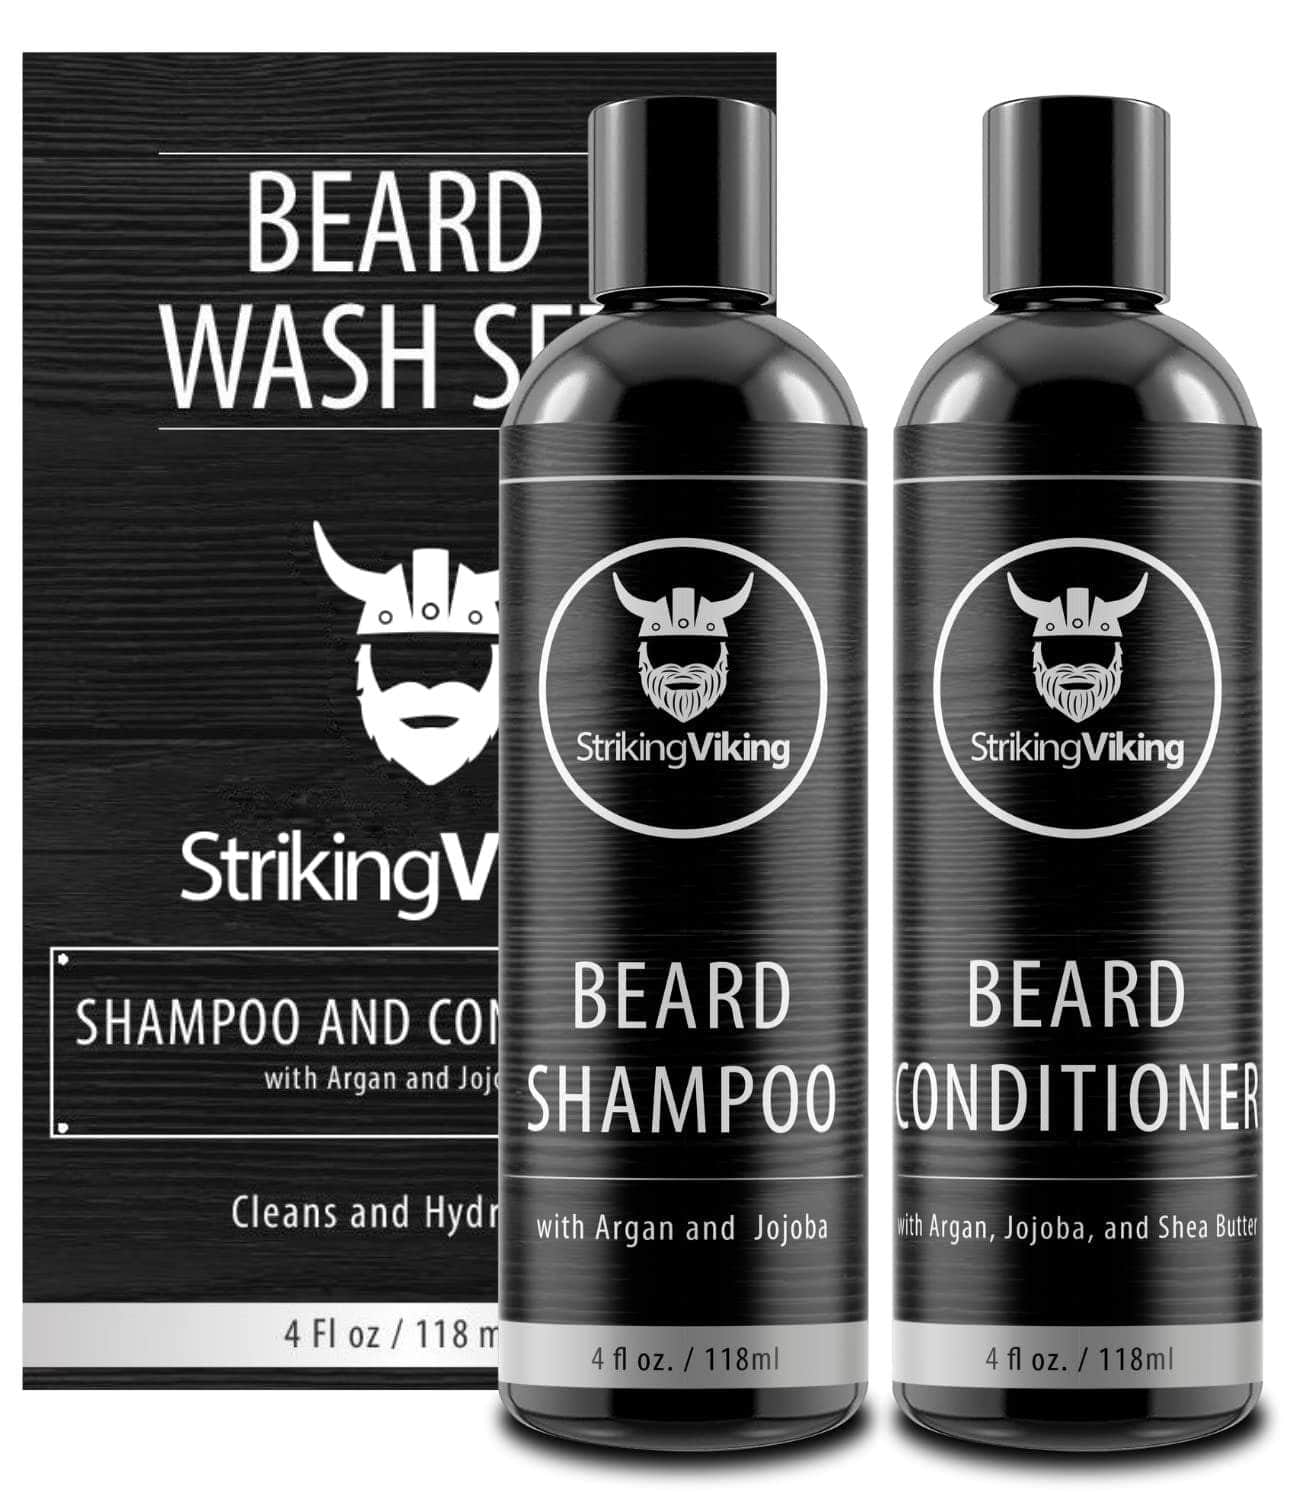 Beard Shampoo and Beard Conditioner for Men, All-Natural Beard Wash Set Cleanse Softens & Conditions with Organic Argan and Jojoba Beard Oils, Sulfate & Paraben Free by Ancient Treasures Ancientreasures Viking Odin Thor Mjolnir Celtic Ancient Egypt Norse Norse Mythology